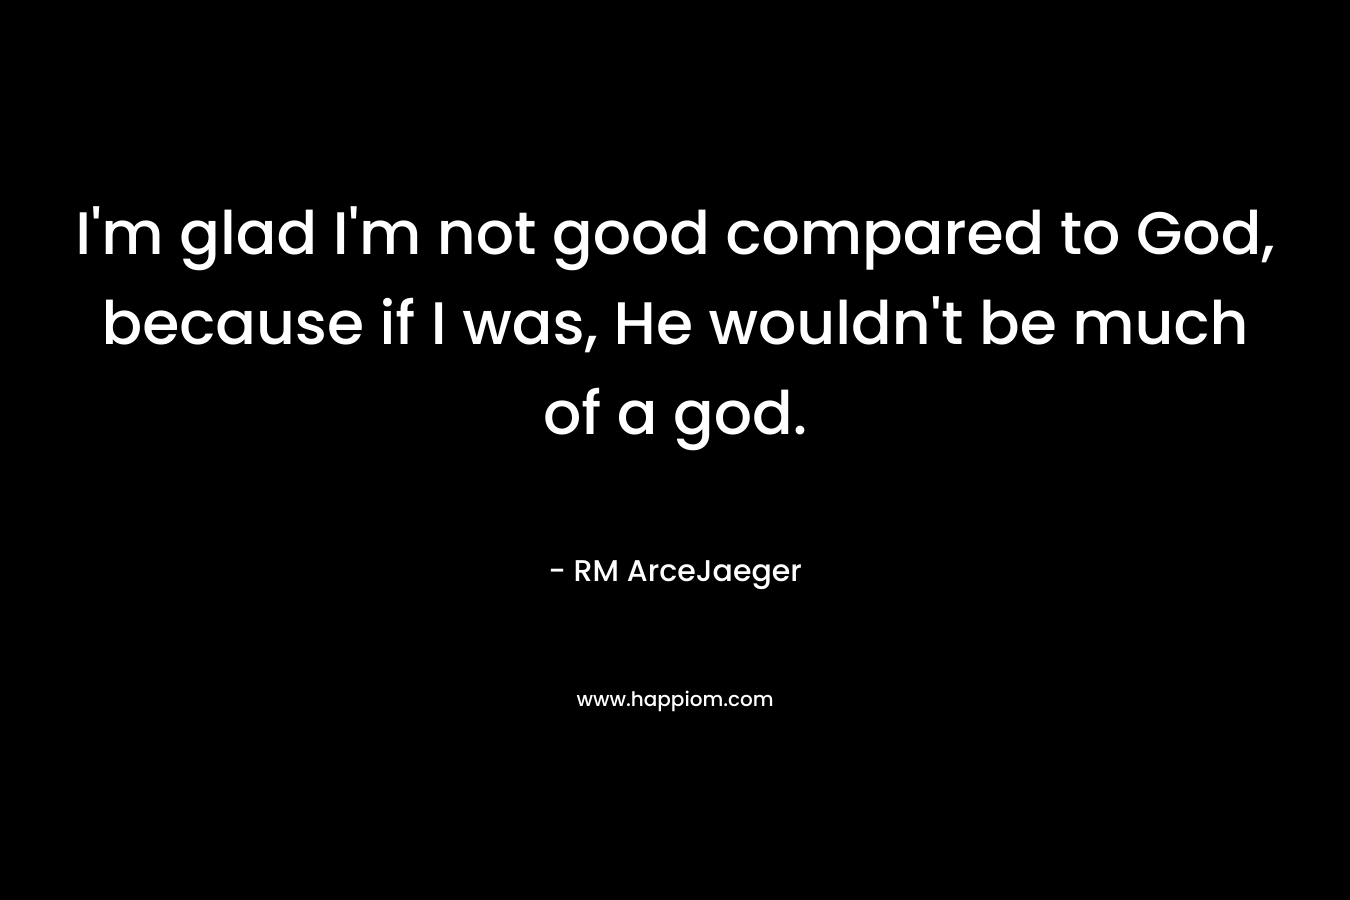 I’m glad I’m not good compared to God, because if I was, He wouldn’t be much of a god. – RM ArceJaeger